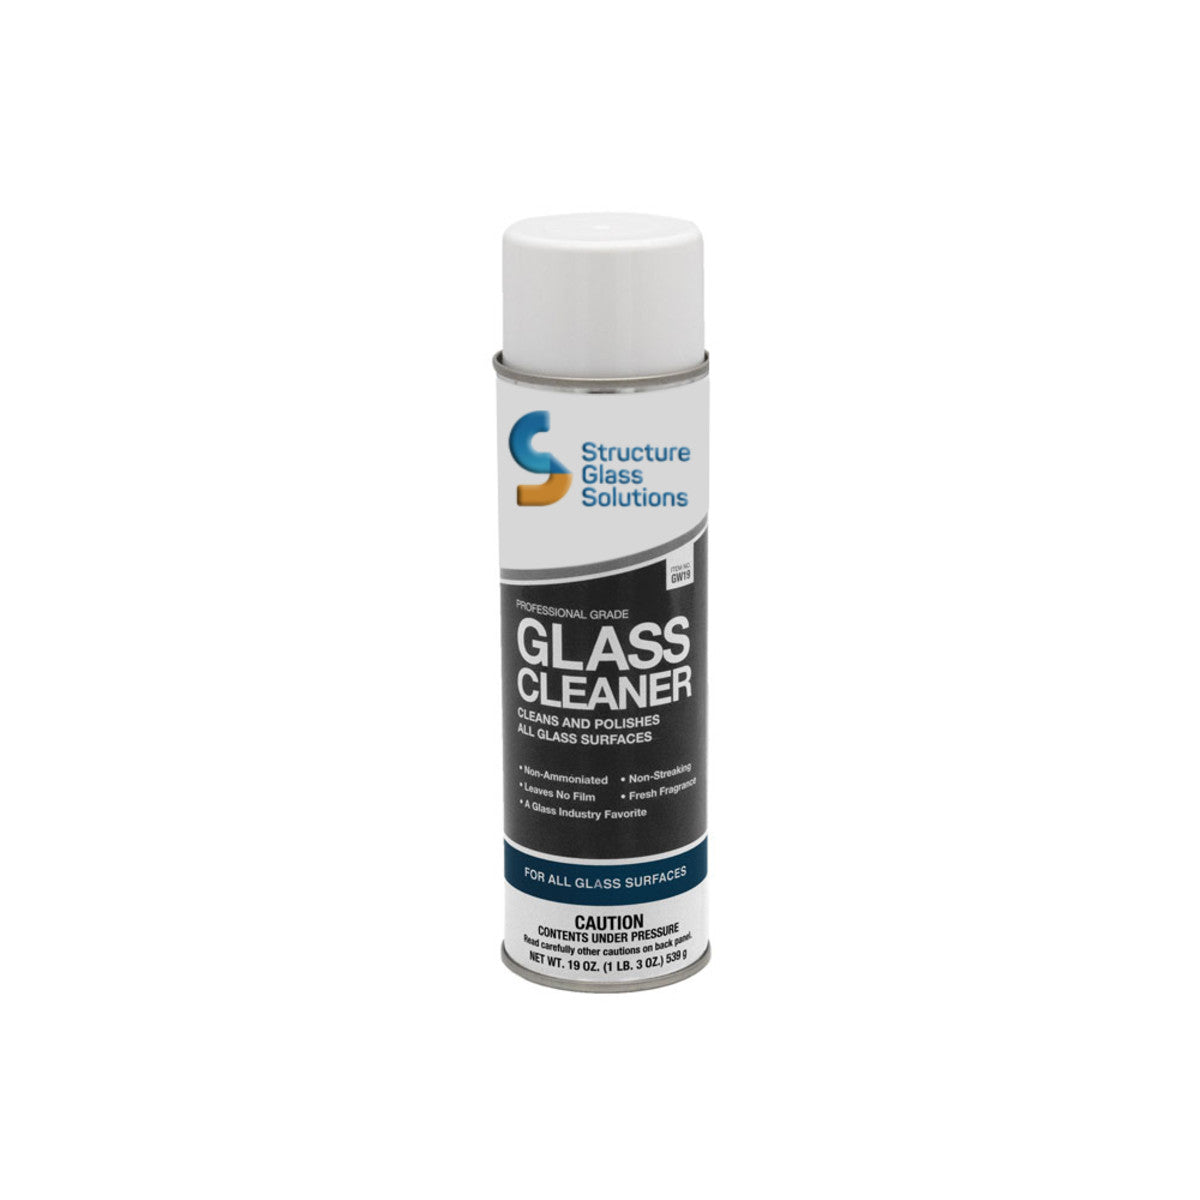 SGS Glass Cleaner (Ammonia Free)